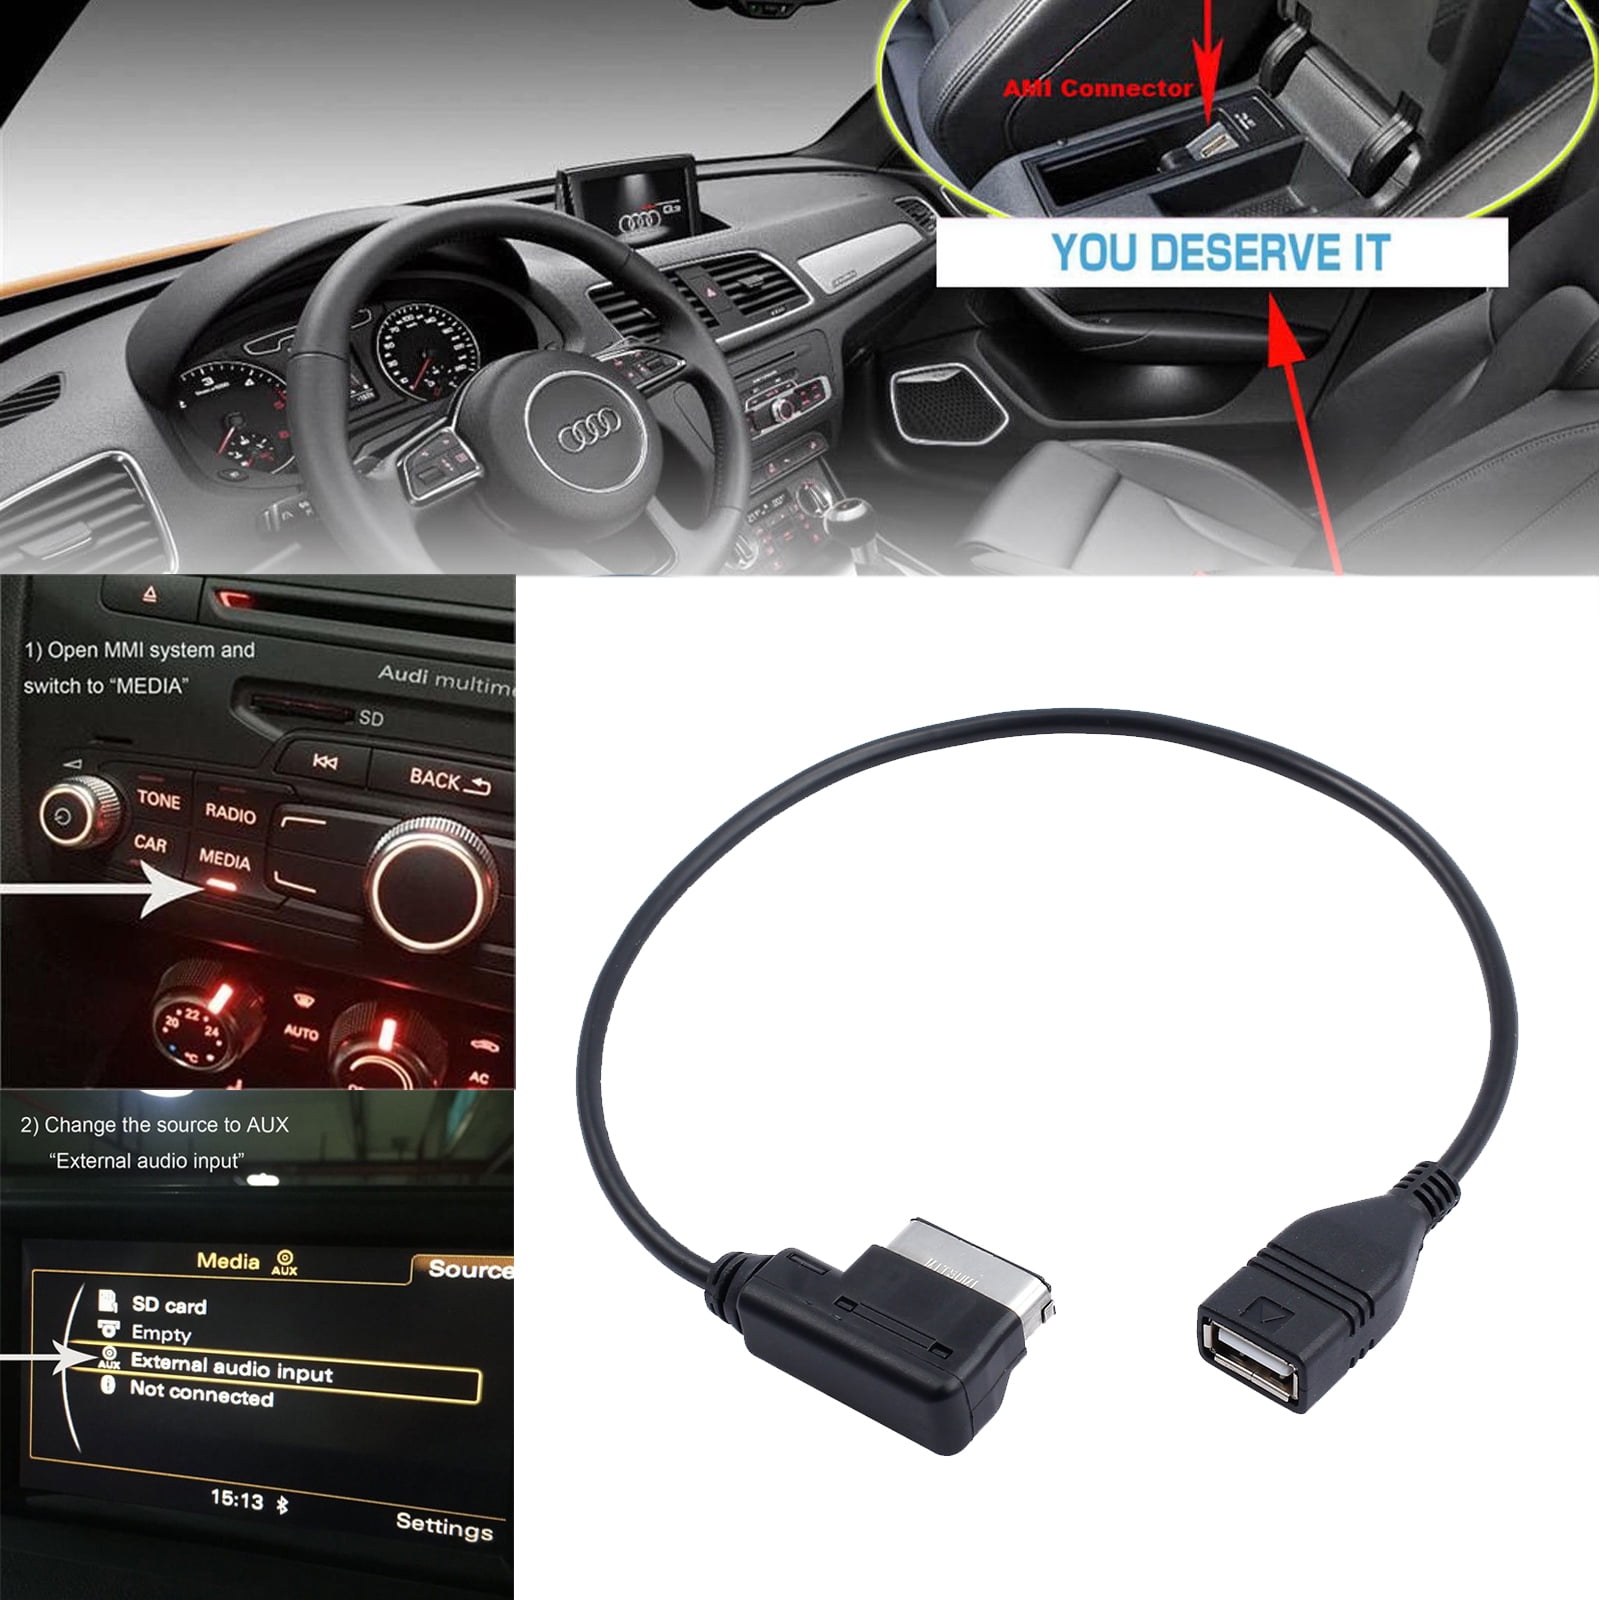 AUDI A4 USB CABLE AMI AUDIO LEAD MEDIA GENUINE MUSIC INTERFACE ADAPTER NOT PHONE 